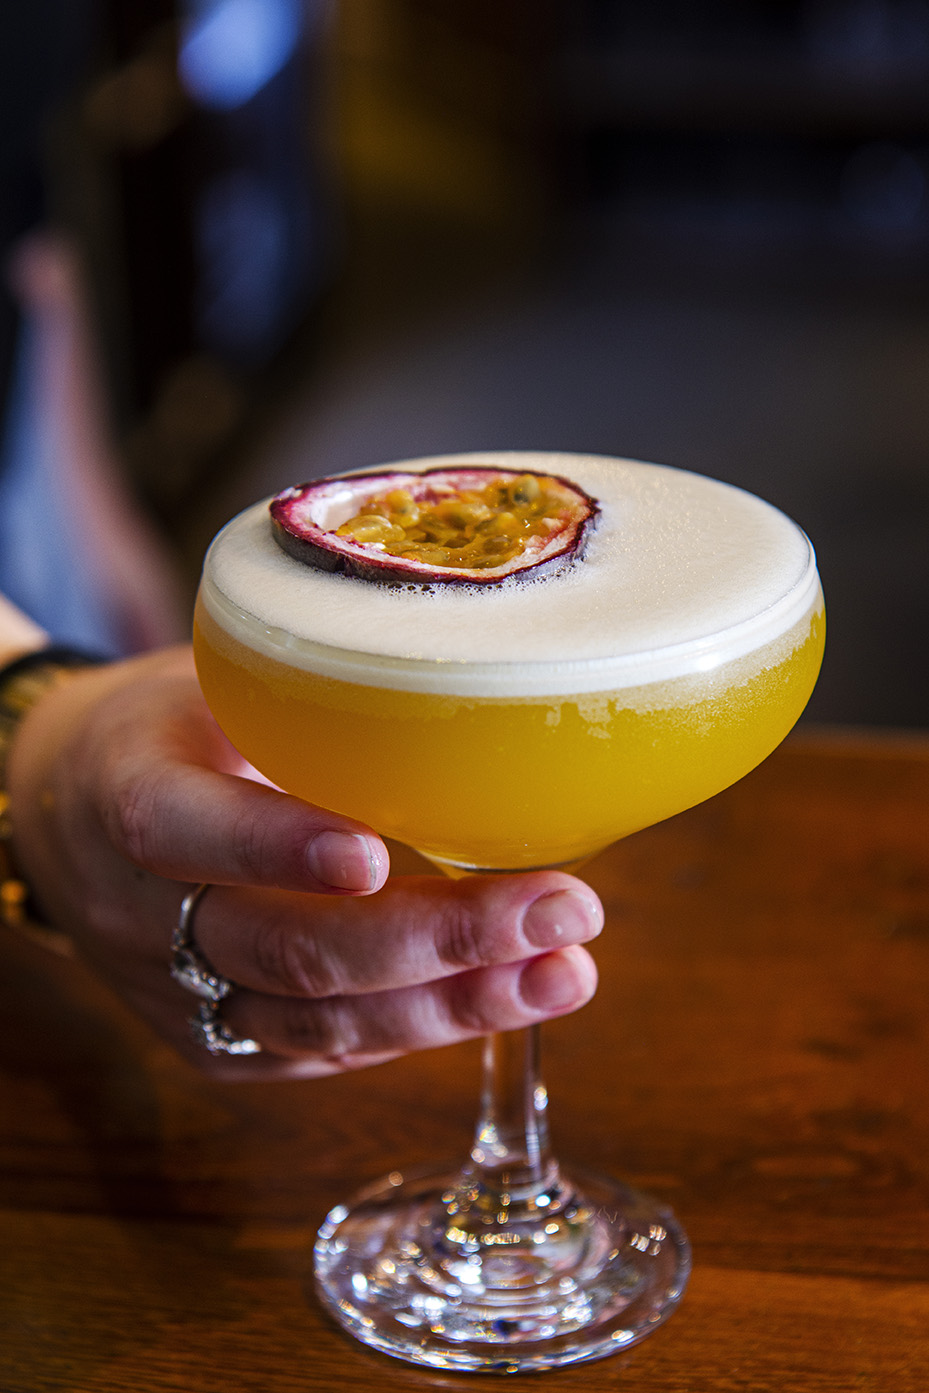 Image shows a close up view of a passion fruit martini with a hand holding the stem of the glass